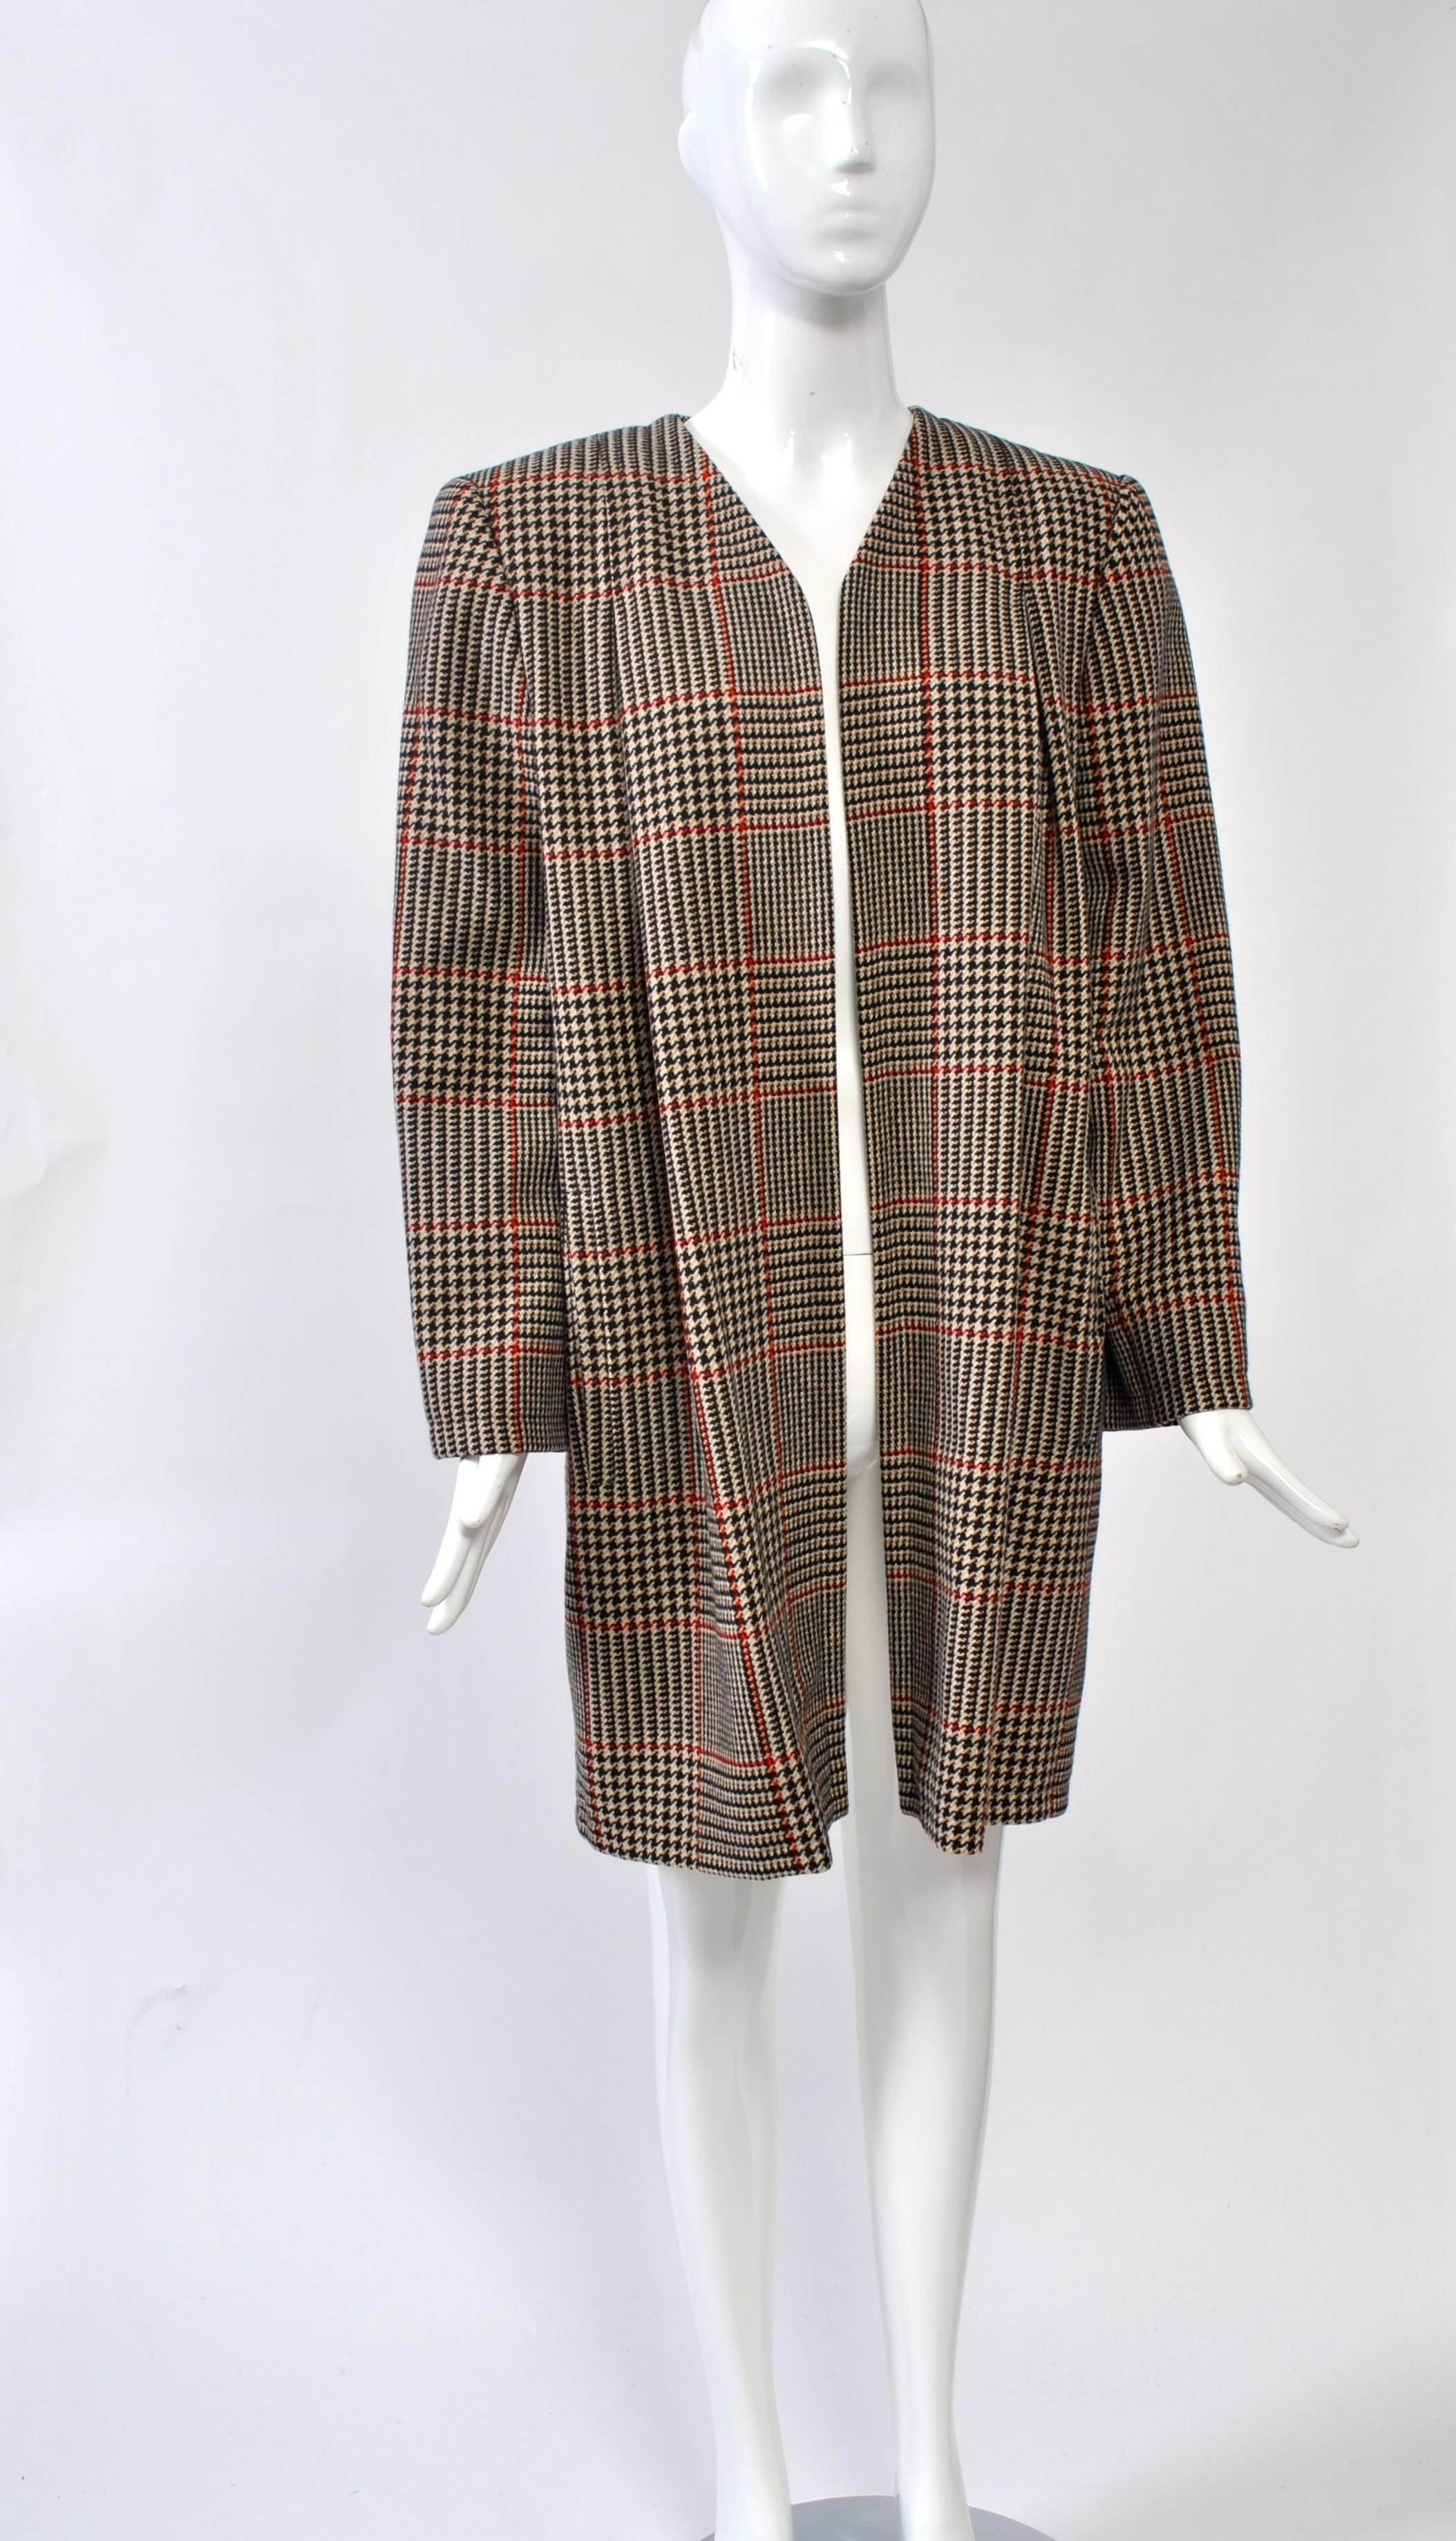 1980s brown glen plaid coat by Valentino featuring a collarless, open front, shoulder pads, soft shoulder pleats in front, and an inverted pleat in back. 